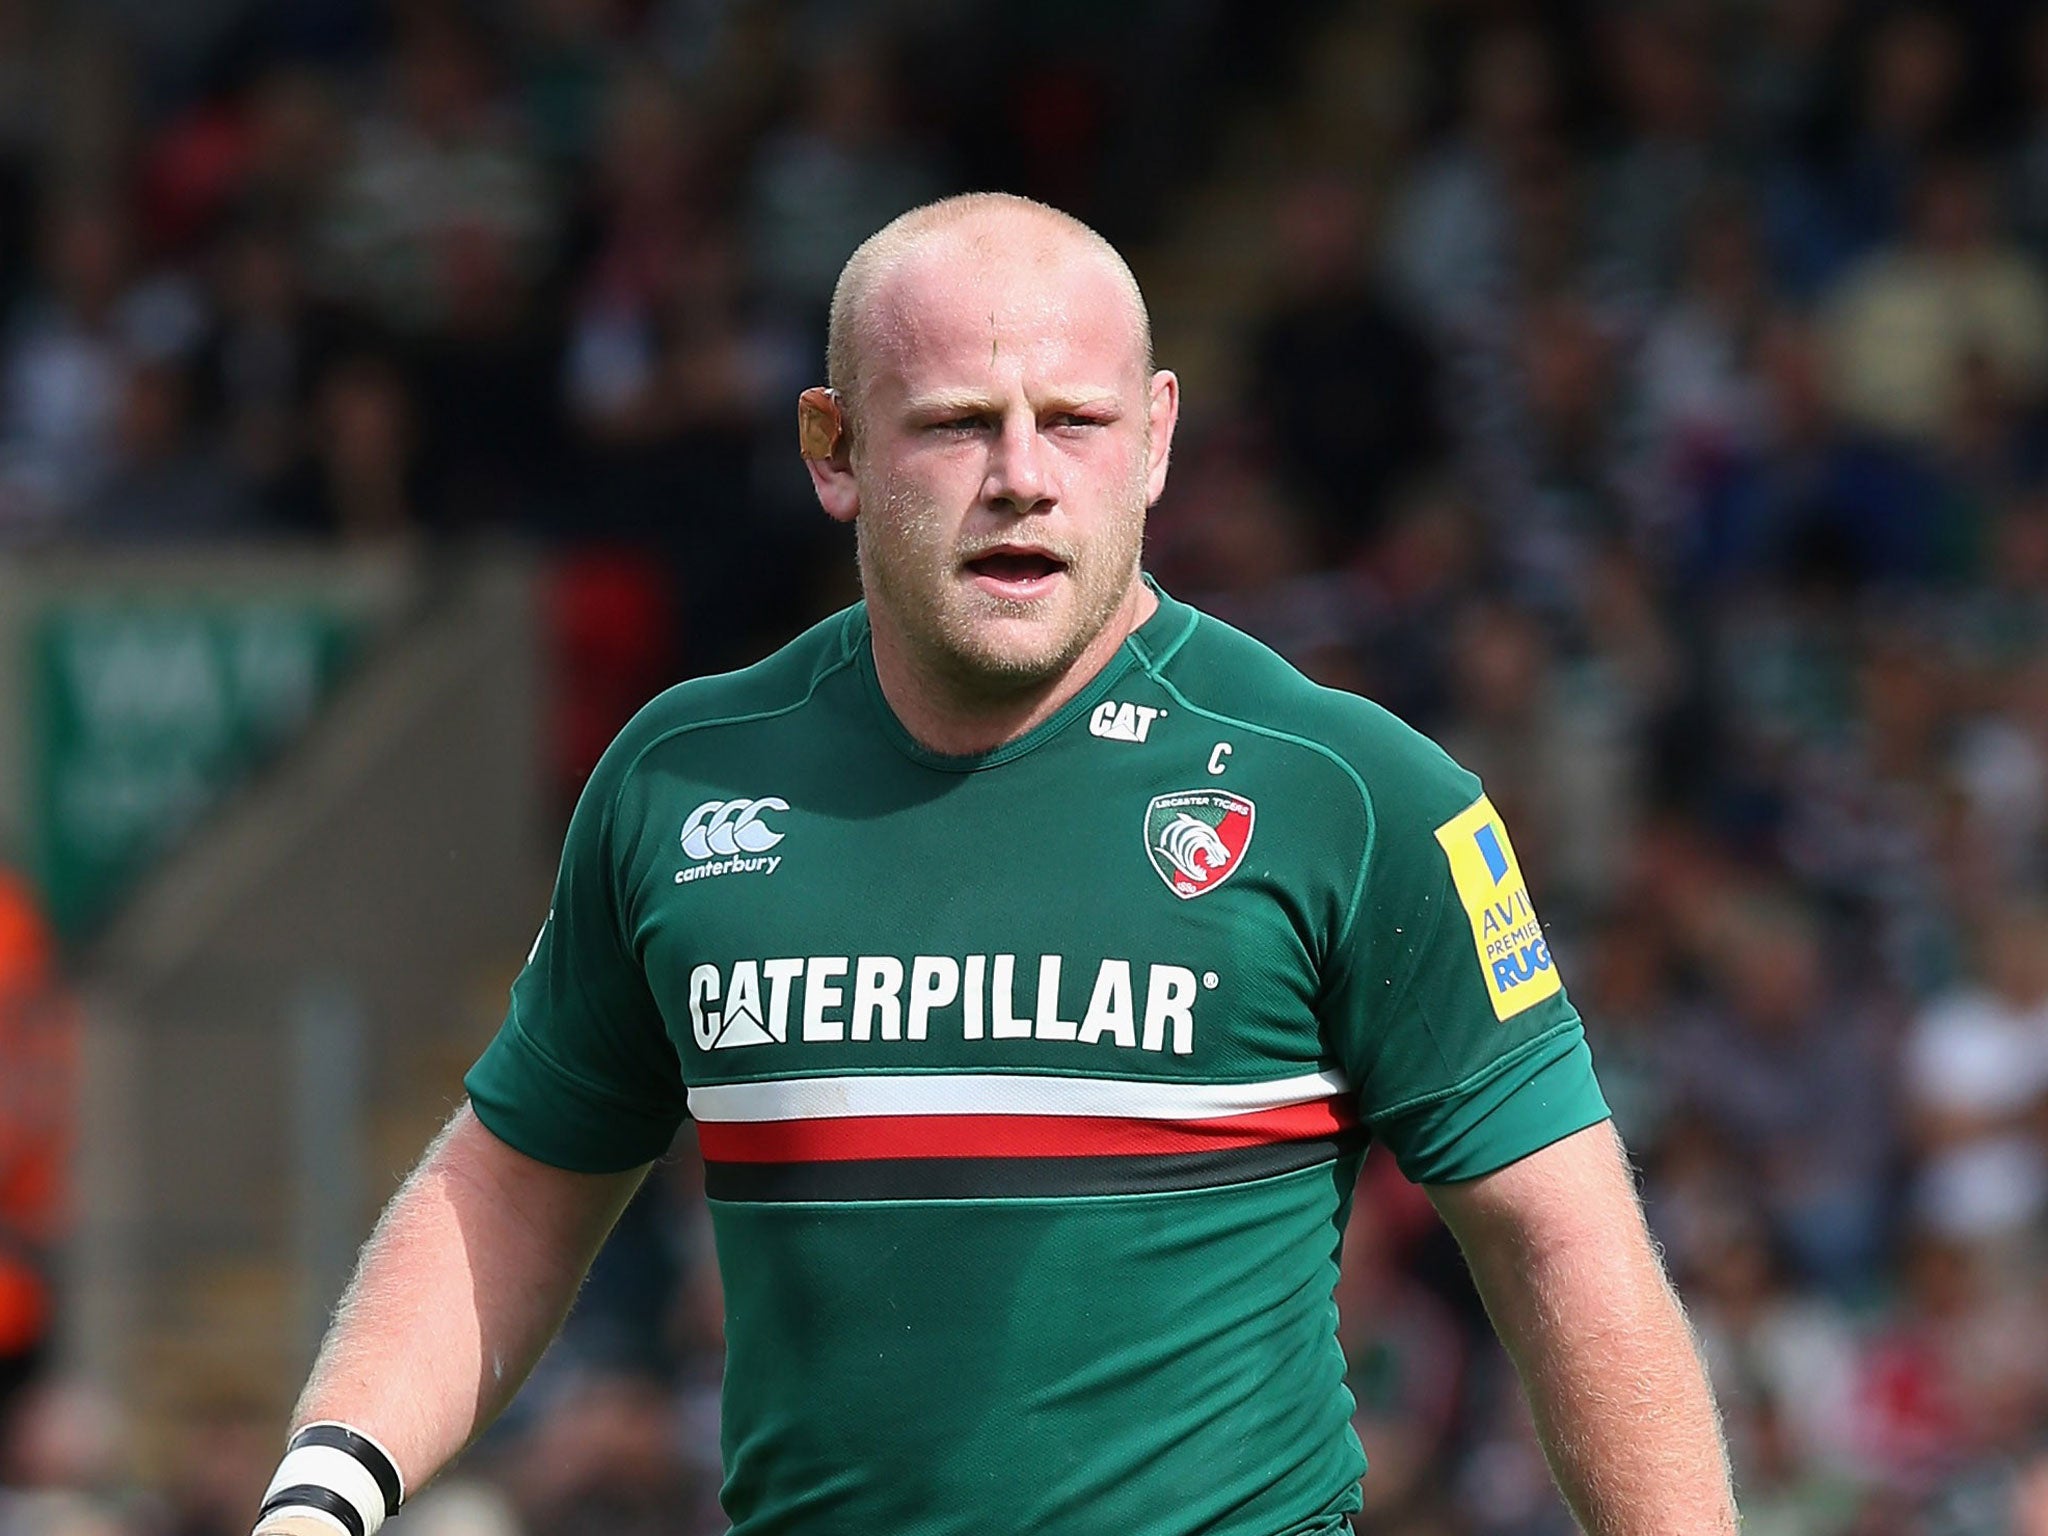 Dan Cole will not face any disciplinary charge